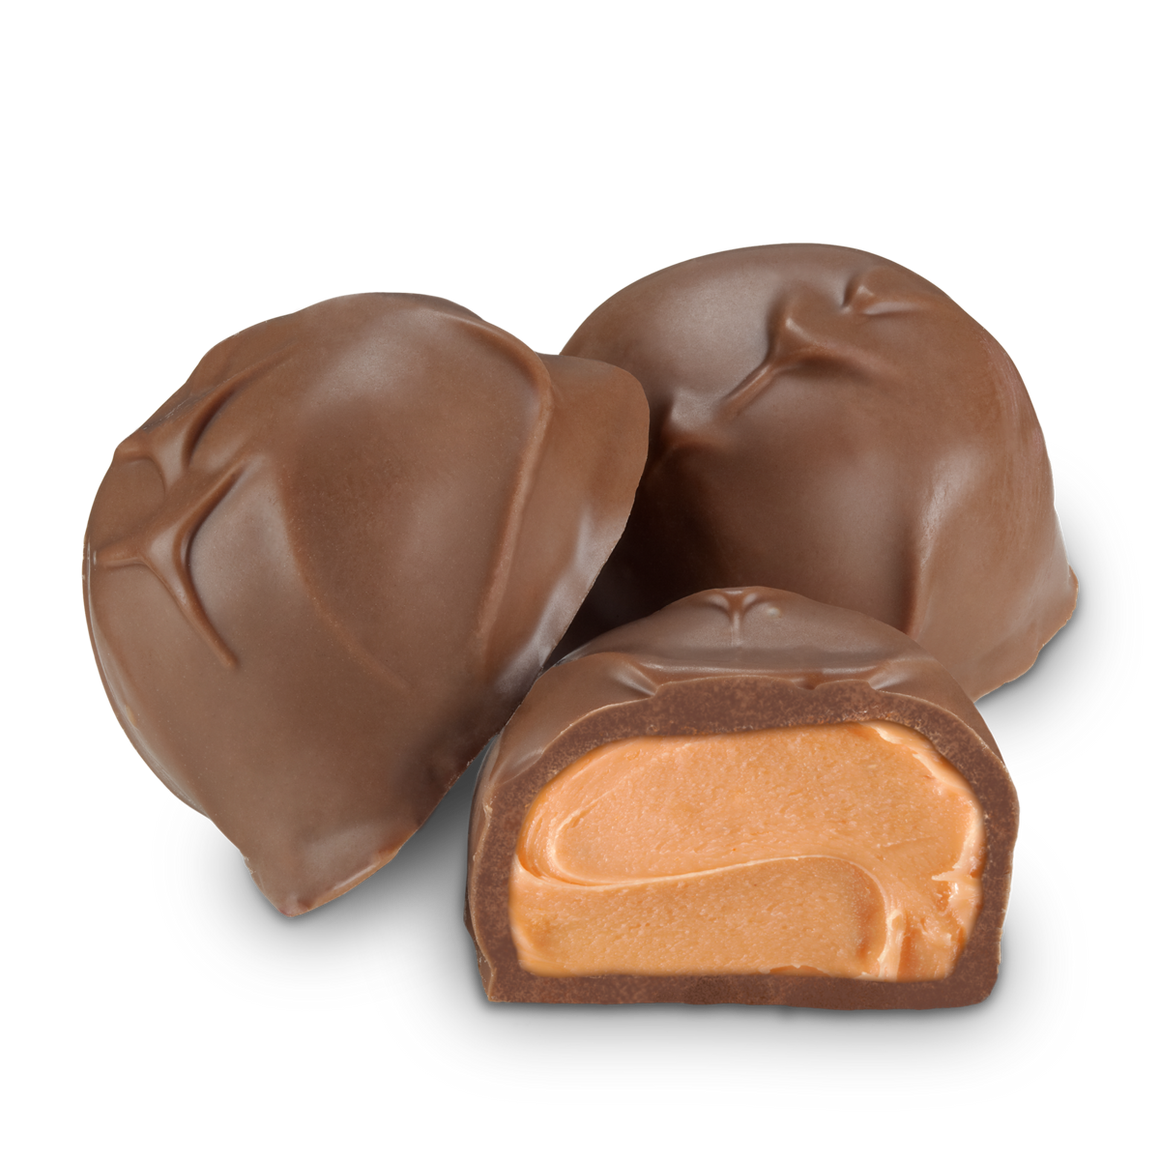 All City Candy Milk Chocolate Orange Creams - 1 LB Box Chocolate Albanese Confectionery For fresh candy and great service, visit www.allcitycandy.com